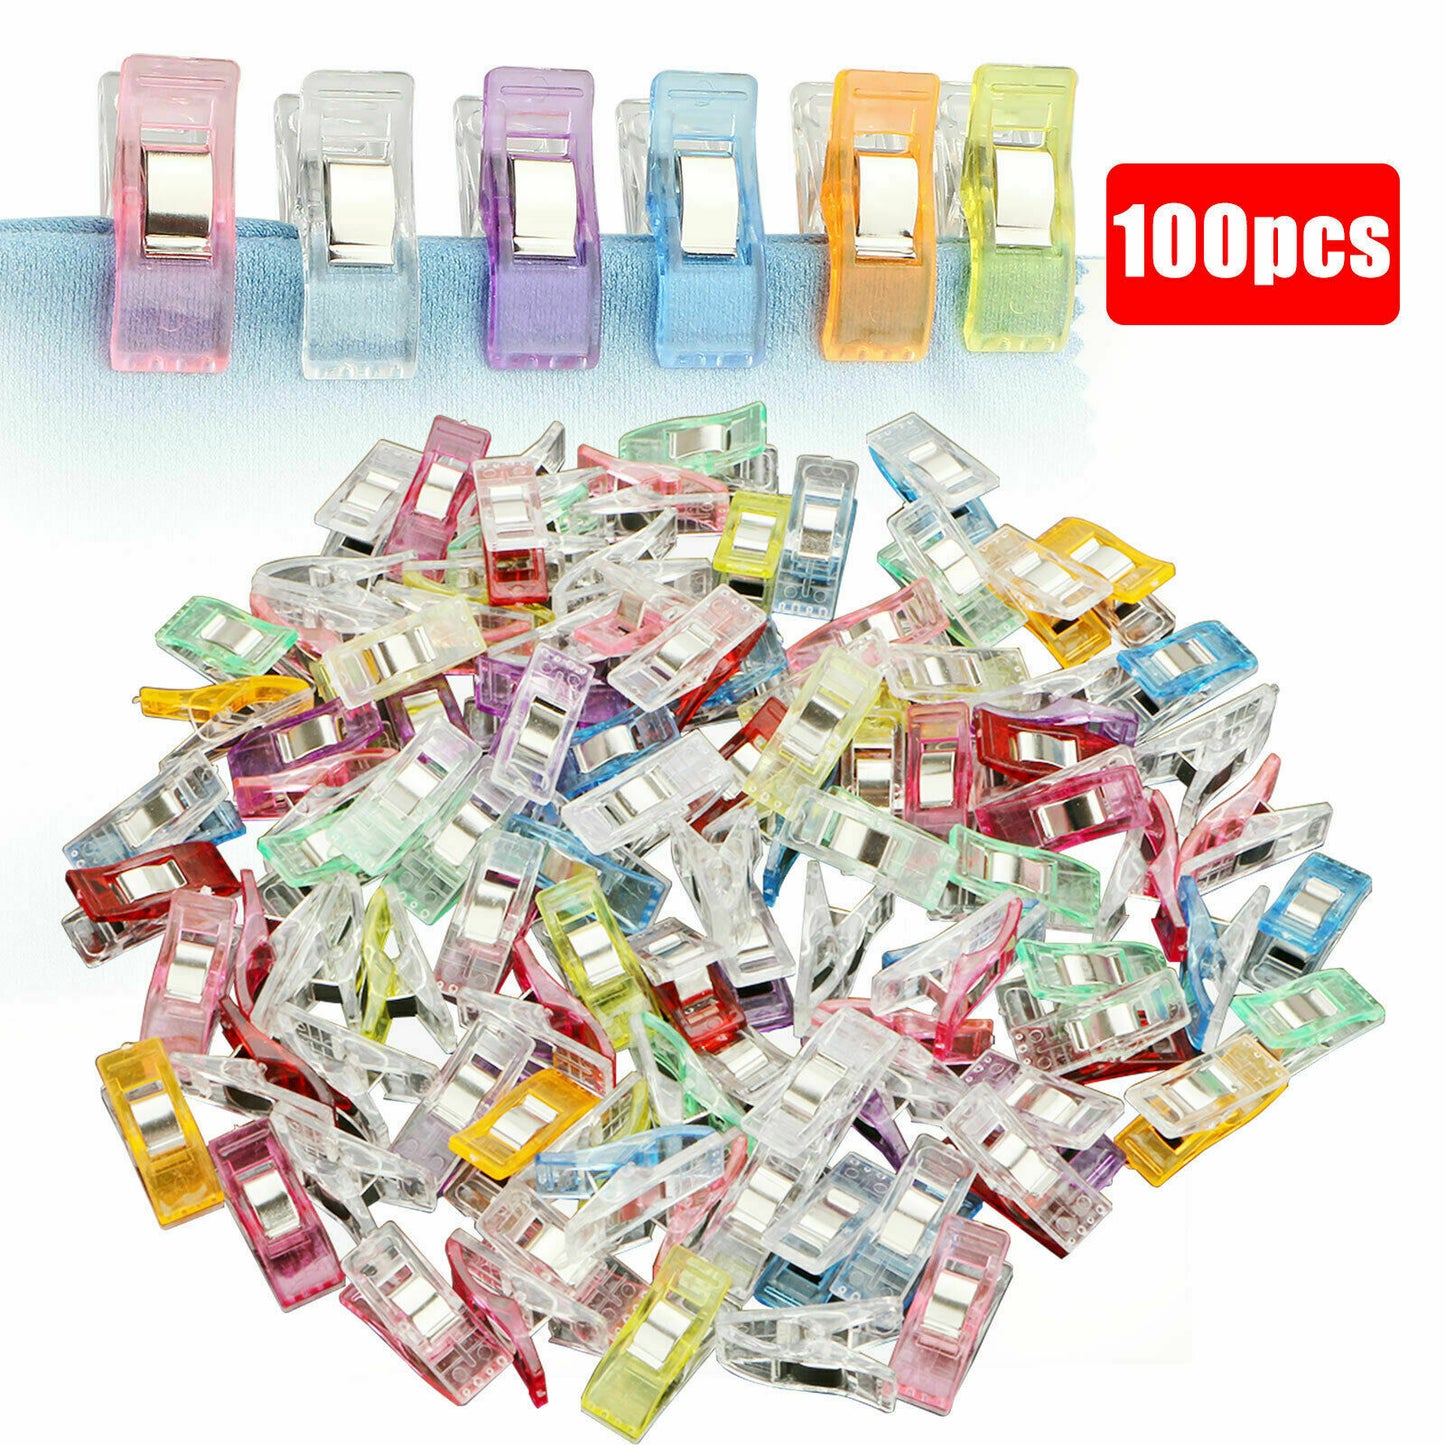 Tablecloth Clips & Weights - Quilting Sewing Clips - Knitting Crochet Clips - 100 Pcs Multicolor -